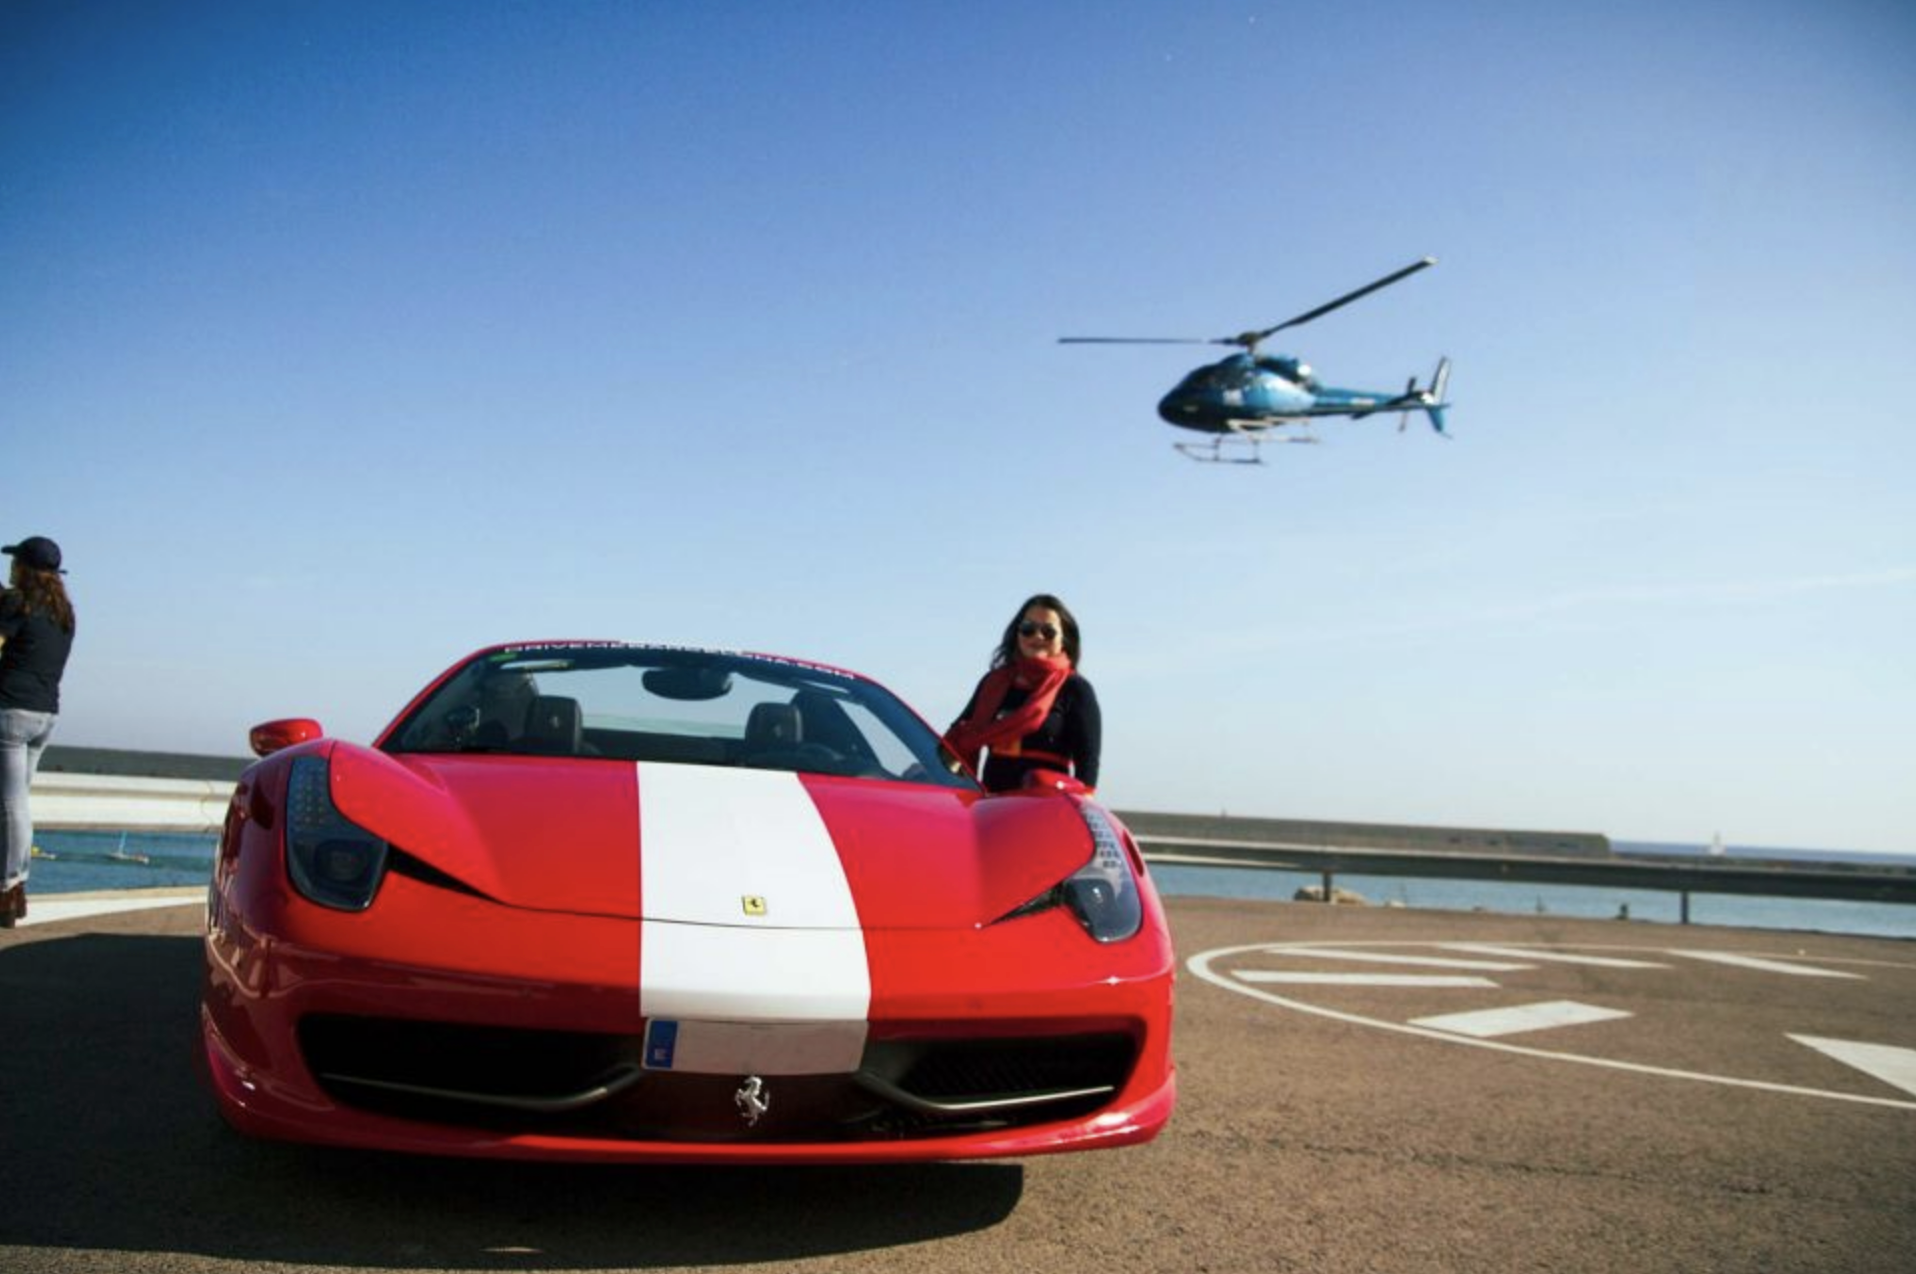 Barcelona Ferrari Driving and Helicopter Experience